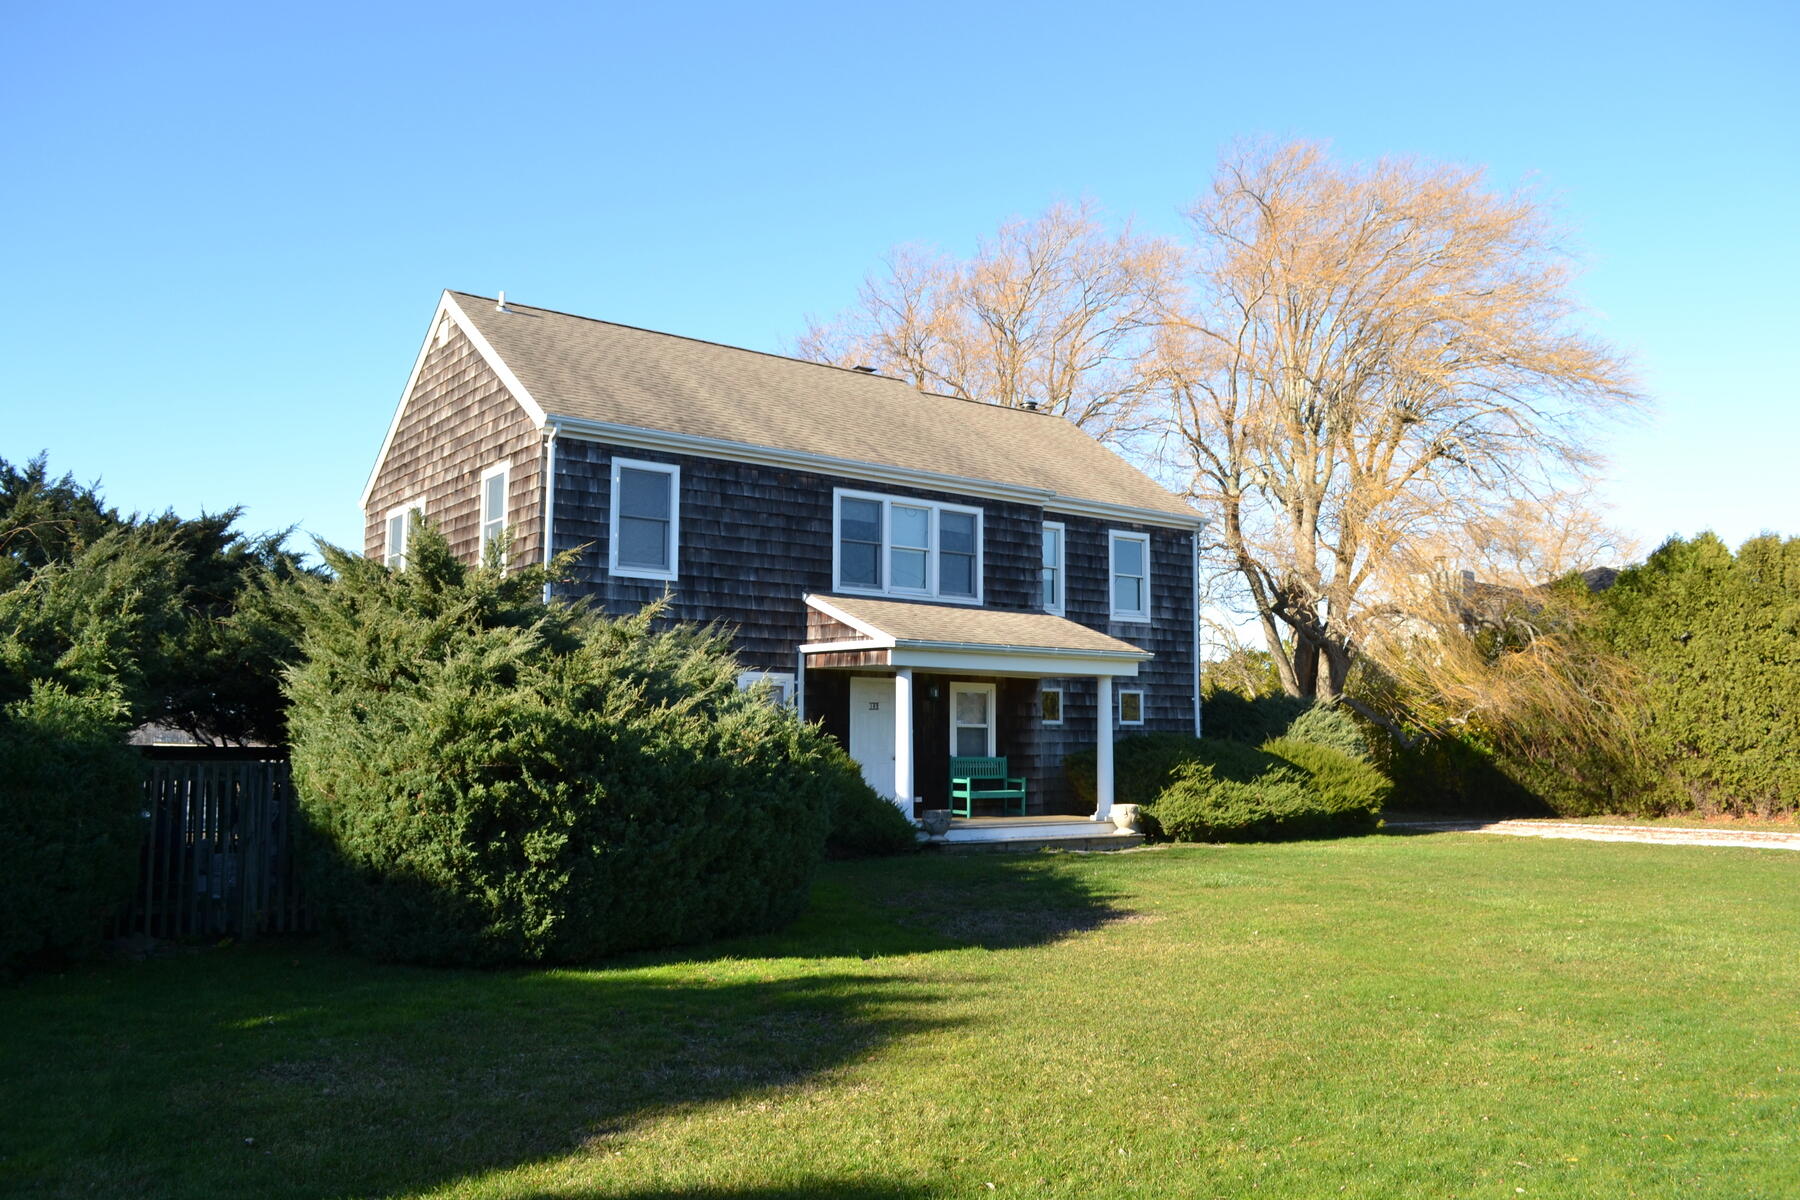 Mill Pond Lane, Water Mill, Hamptons, NY - 5 Bedrooms  
4 Bathrooms - 